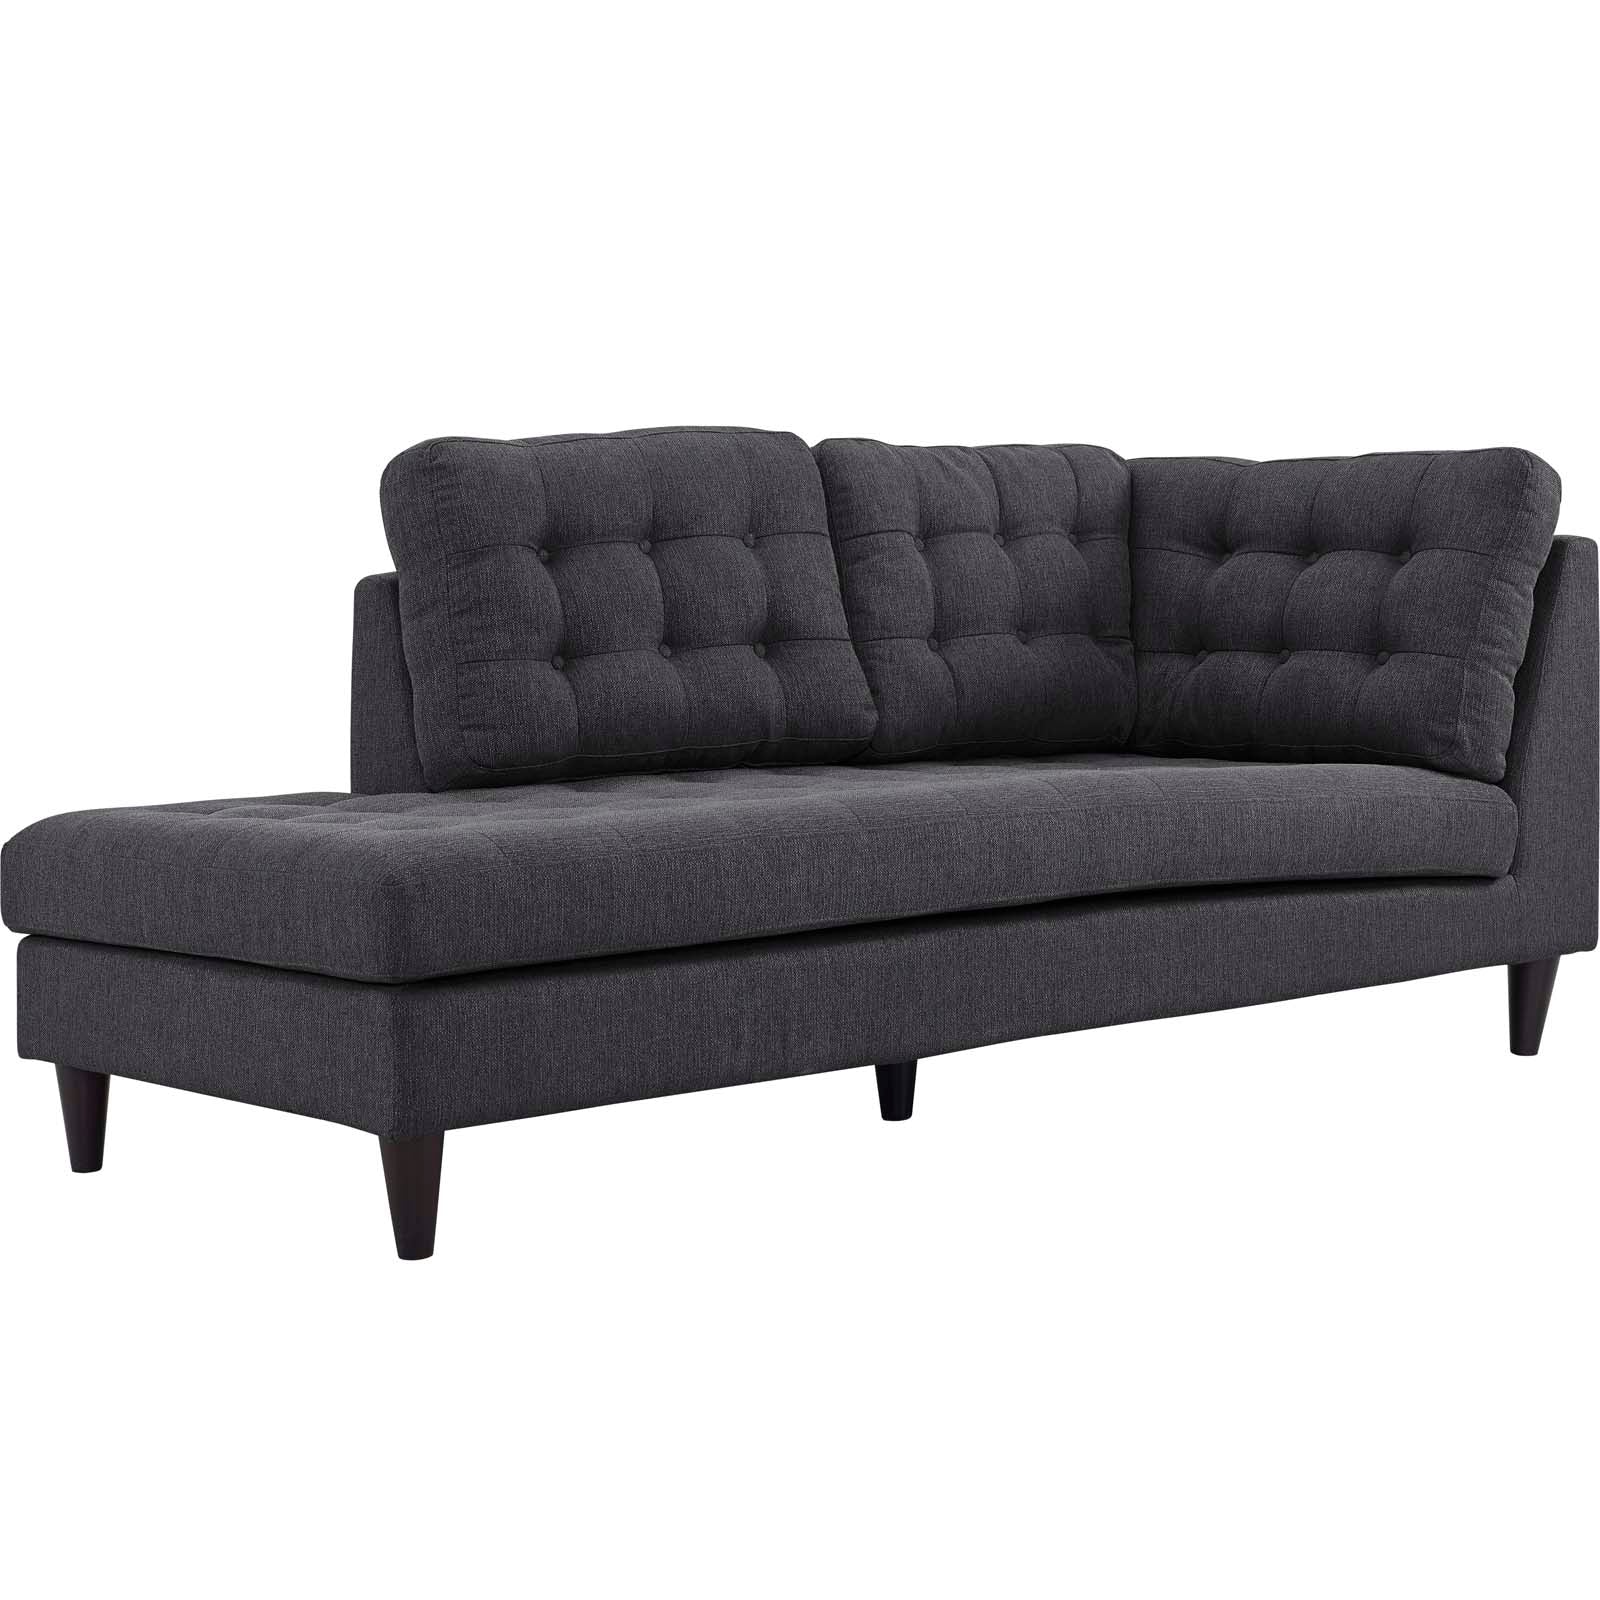 Modway Sleepers & Futons - Empress Upholstered Fabric Left Facing Bumper Gray